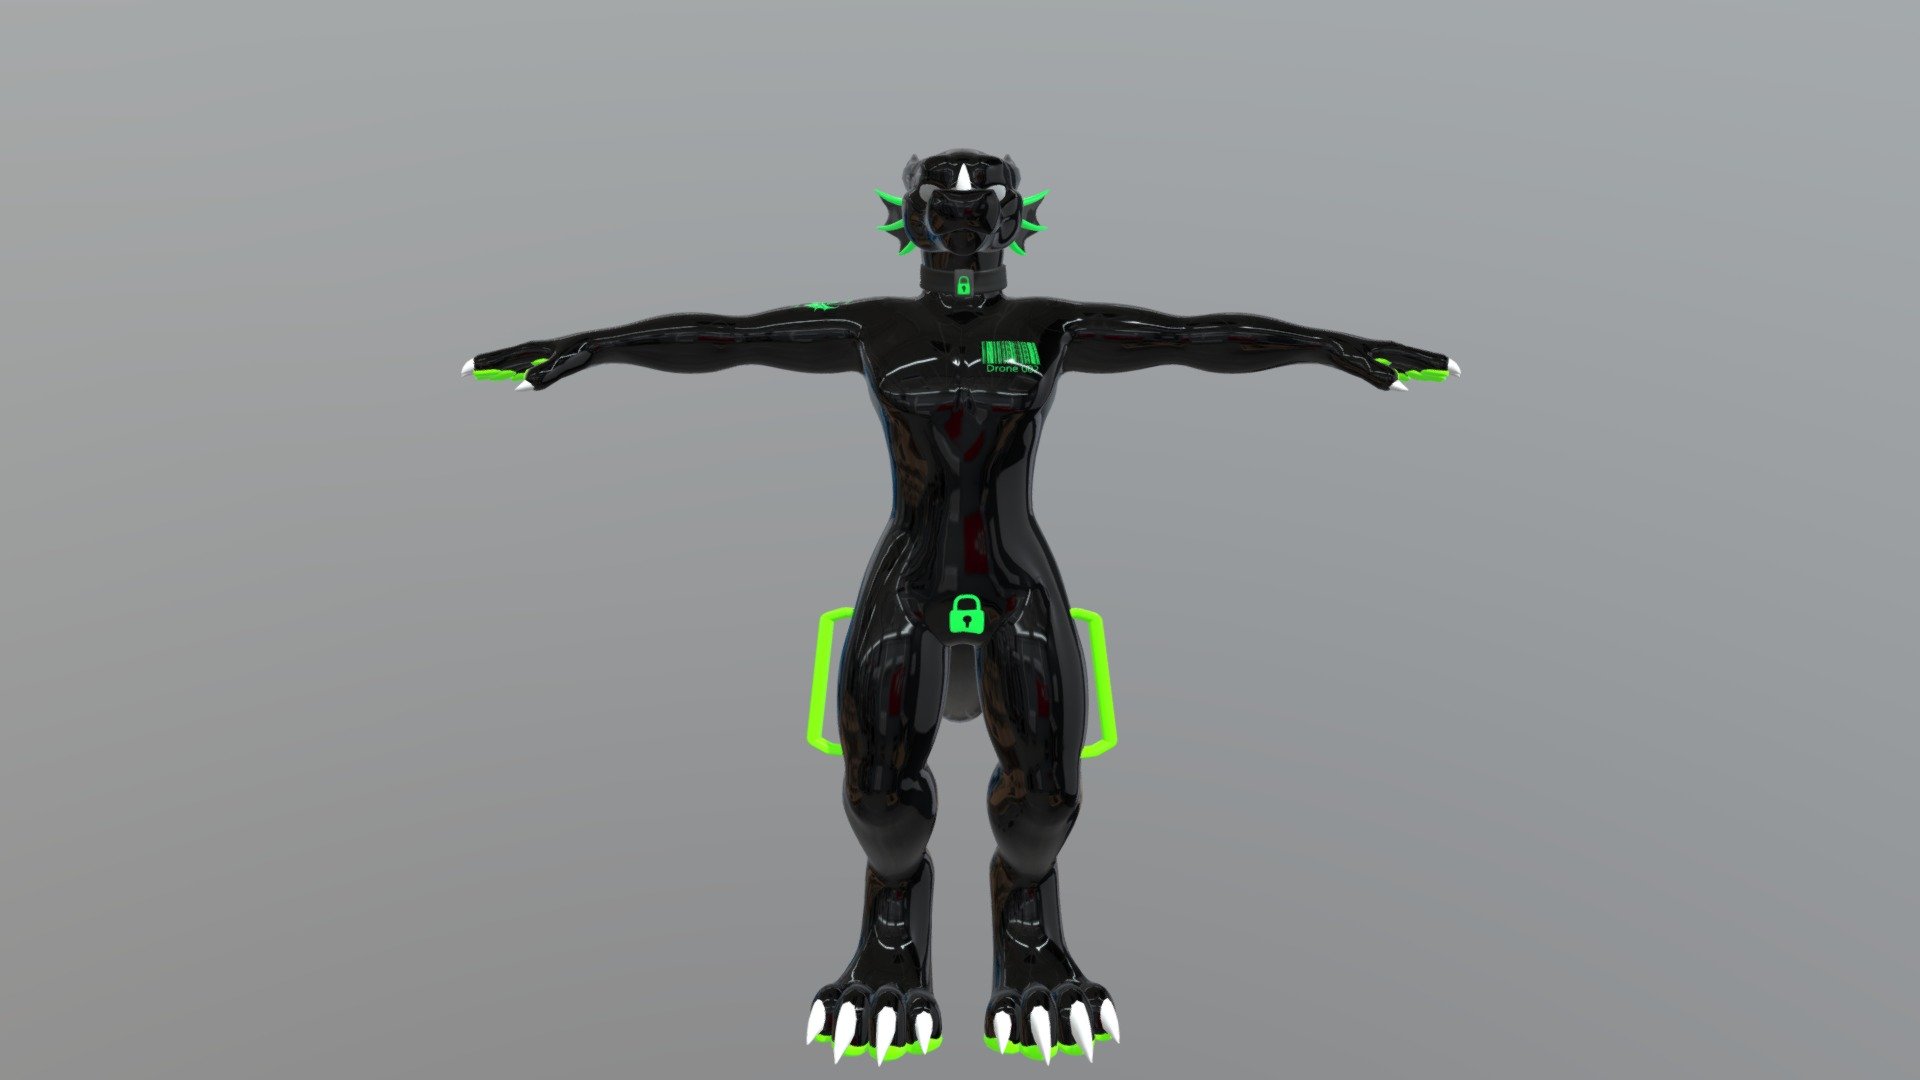 here is my latest creation:
The Rubber Dragon Drone

this model is maked on VrChat SDK3
it gives in green, orange, red, purple
and as female and male

you can find it in volgender VrChat world:
https://vrchat.com/home/world/wrld_df09c9f0-793f-40b2-9f92-9bd06676ab50

or you can become part of our community:
https://discord.gg/WJt9GmPU3z
 - Rubber Dragon Drone - 3D model by Razeicrum (@Razeicrum1589) 3d model